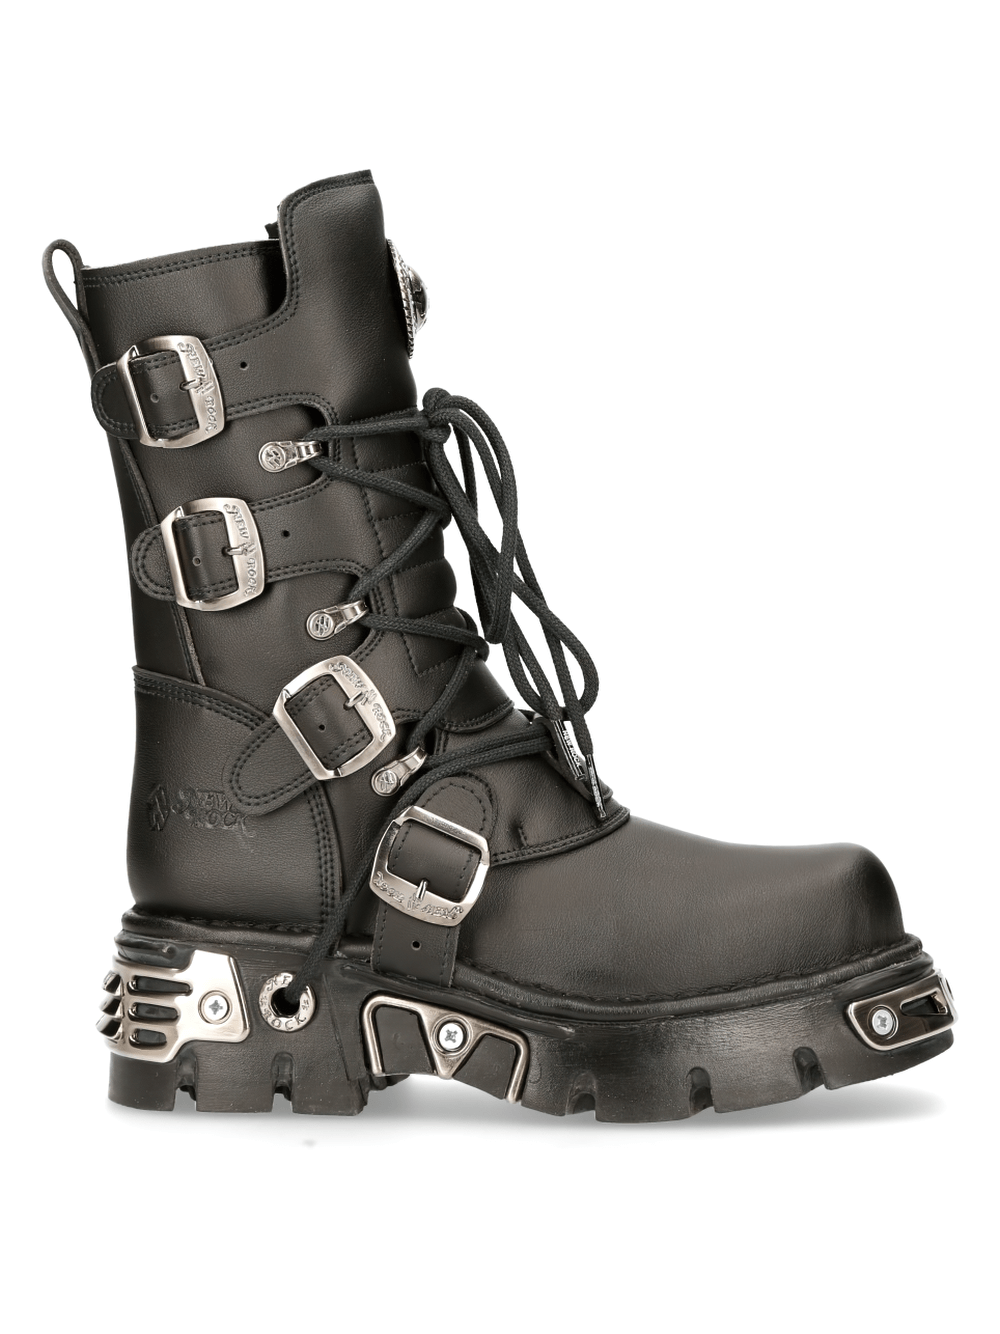 NEW ROCK Metallic Accented Urban Lace-Up Boots